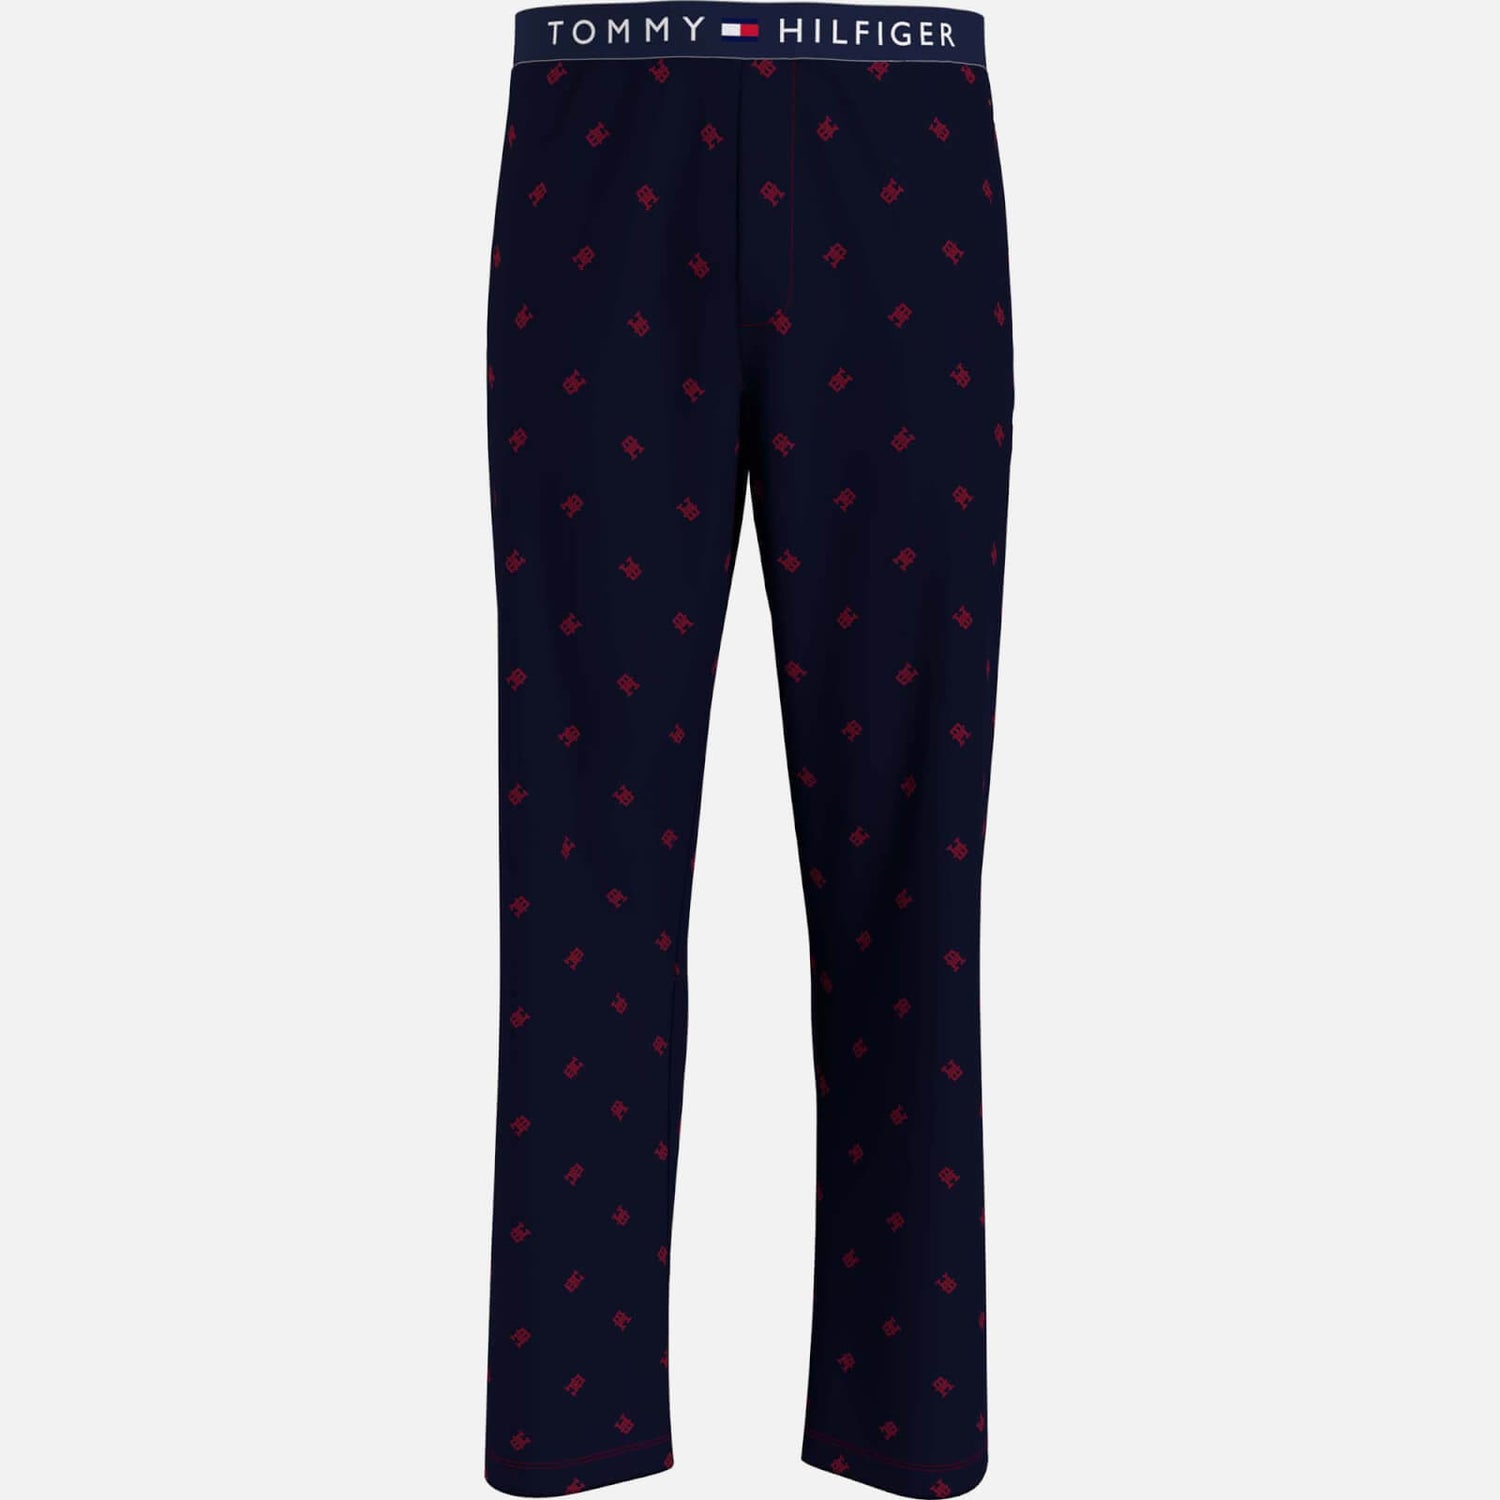 Tommy Hilfiger Woven Printed Pants - S